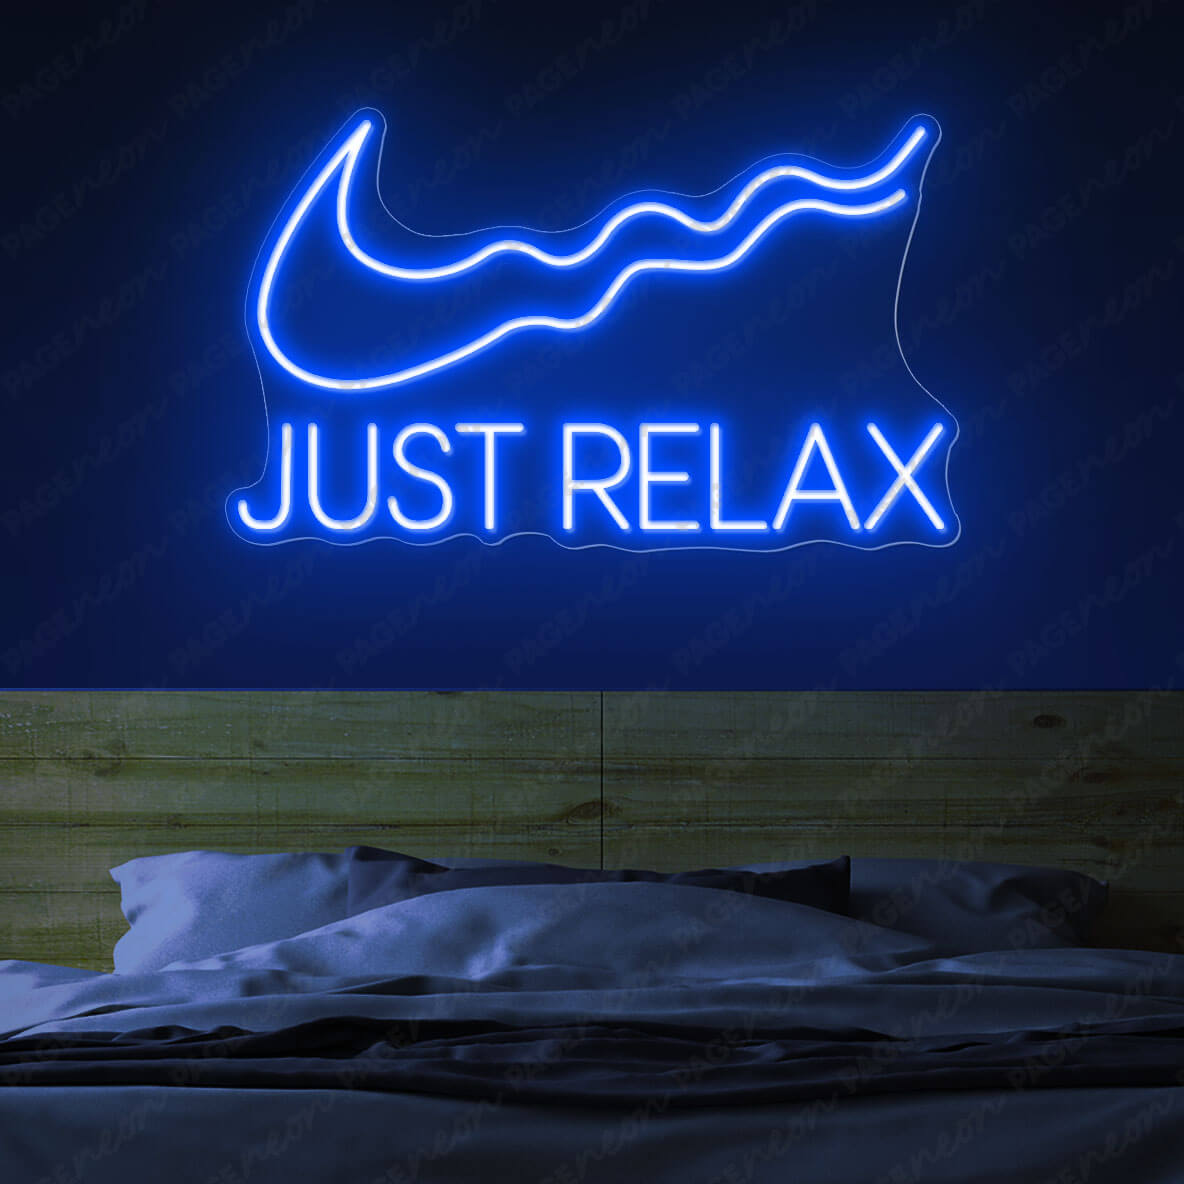 Just Relax Neon Sign Led Light Blue